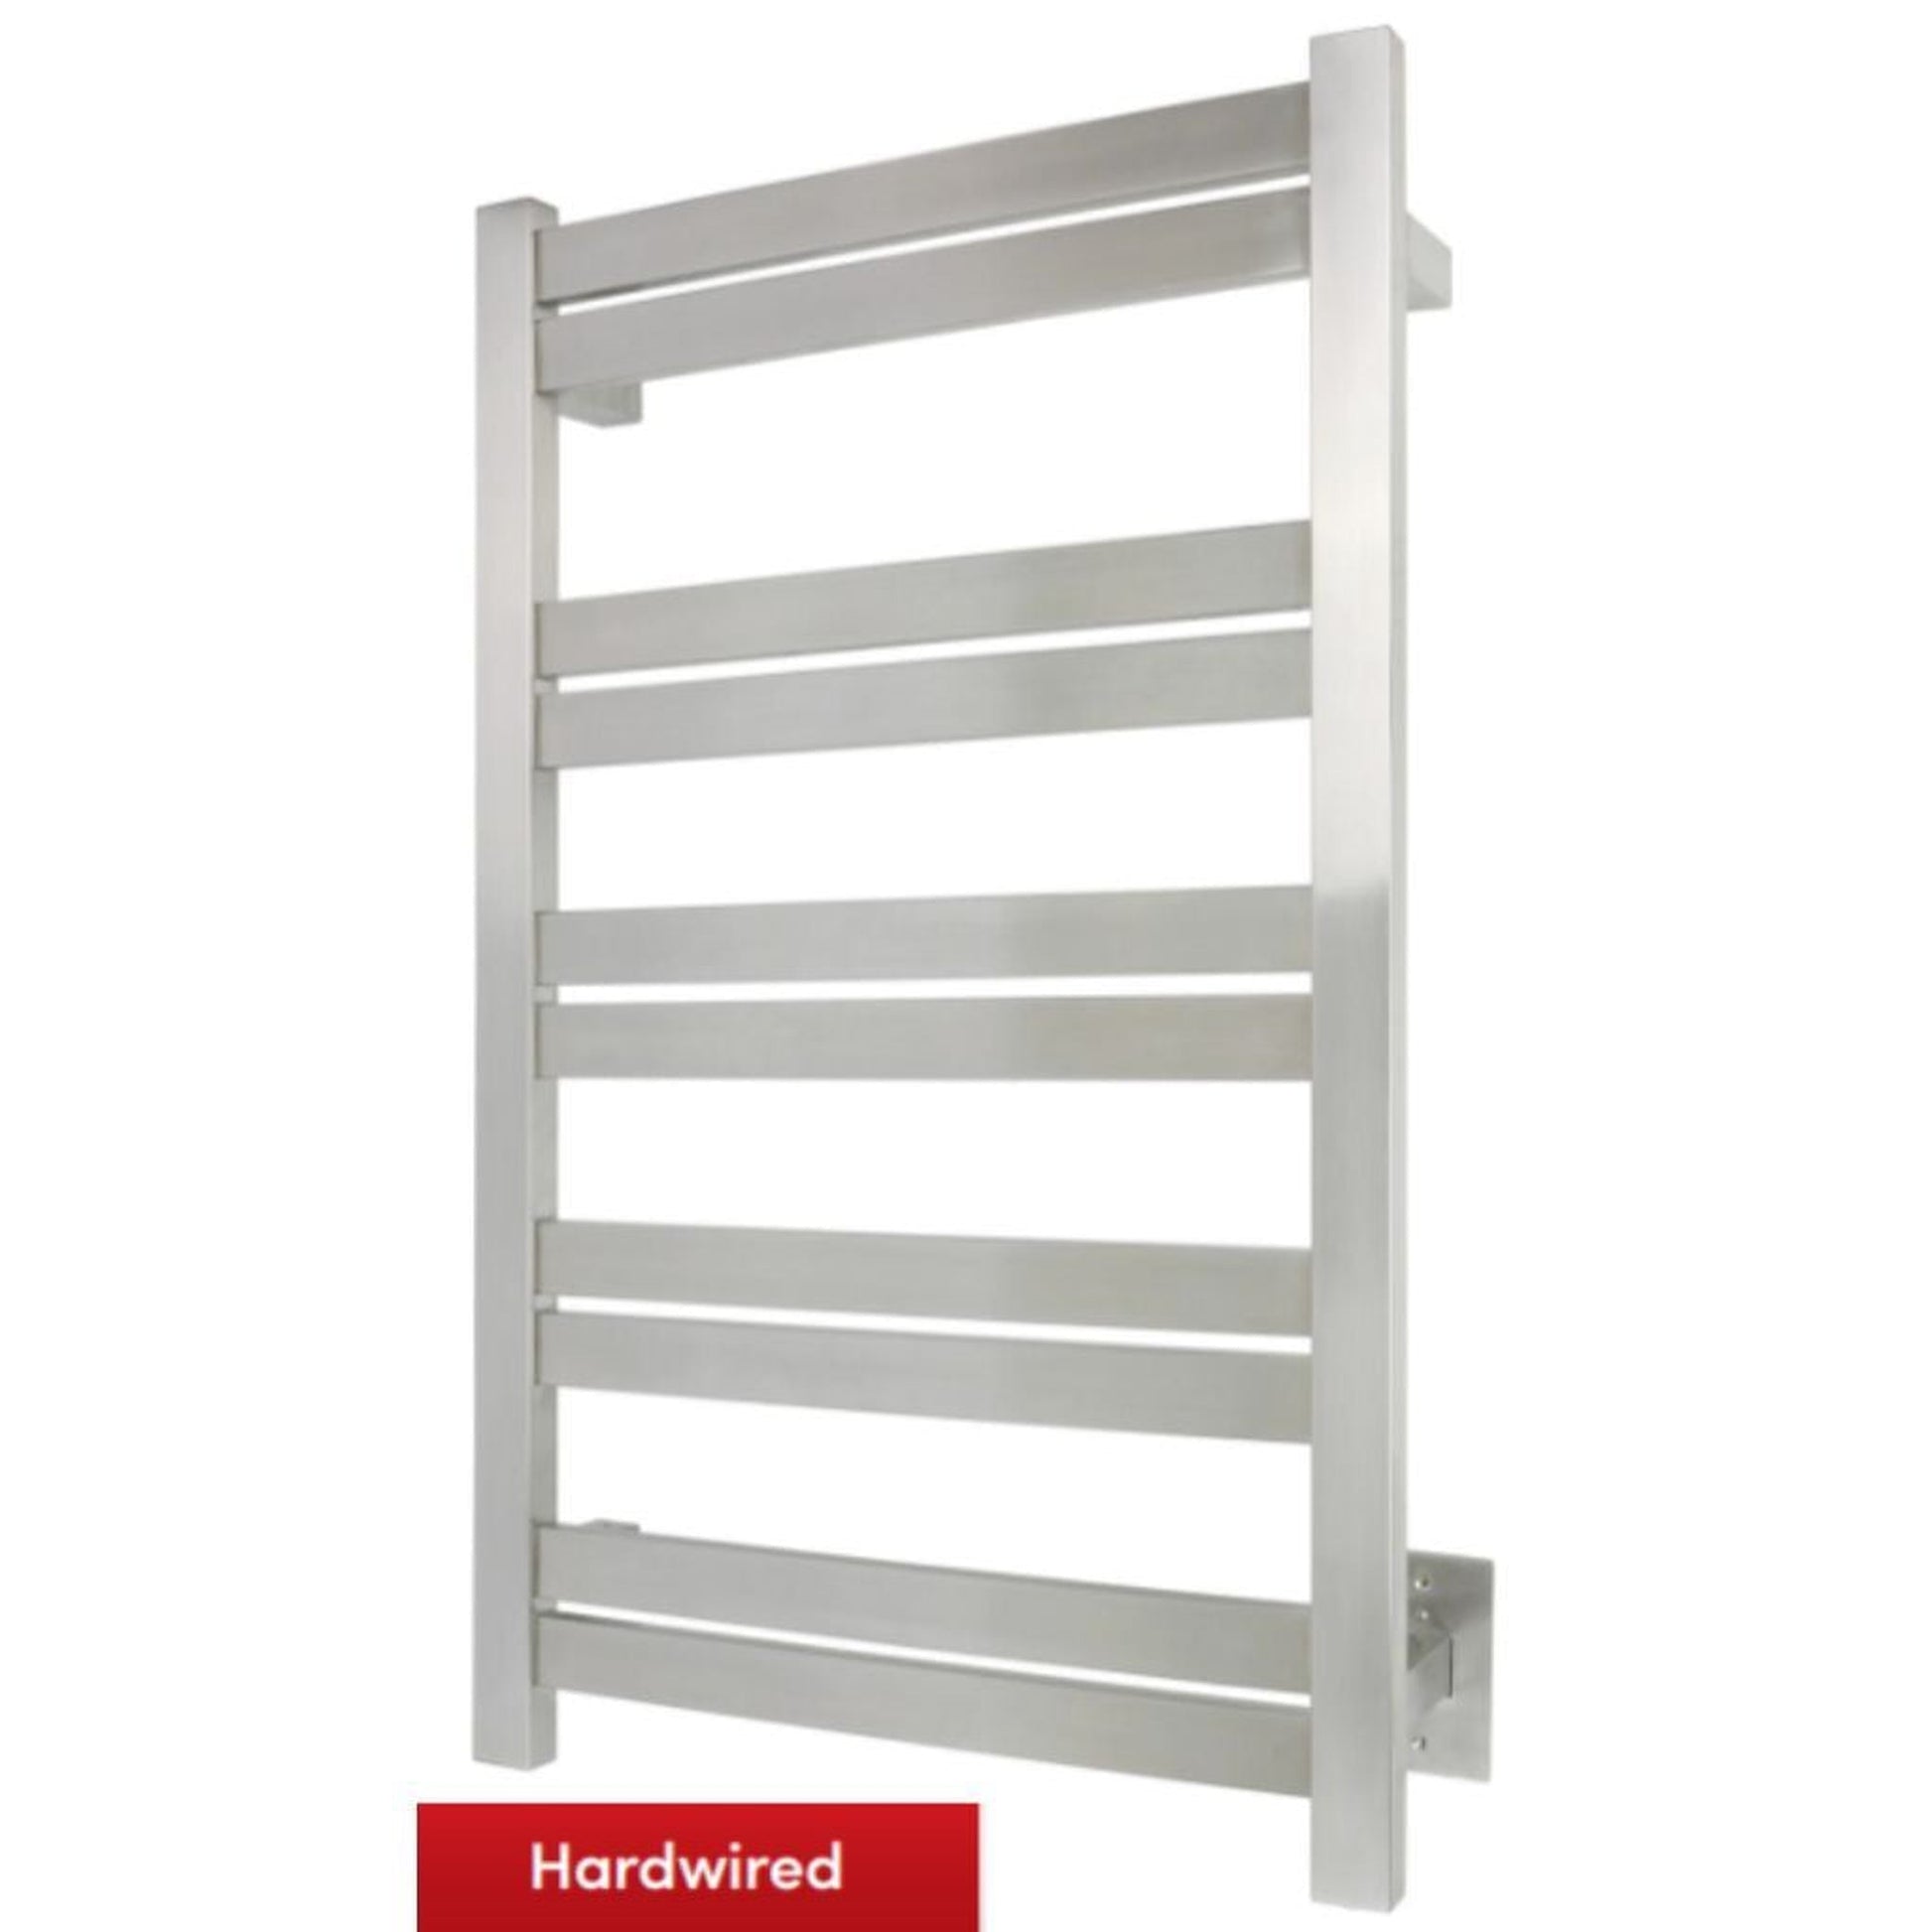 WarmlyYours Grande 10 21" x 34" Brushed Stainless Steel Wall-Mounted 10-Bar Hardwired Towel Warmer